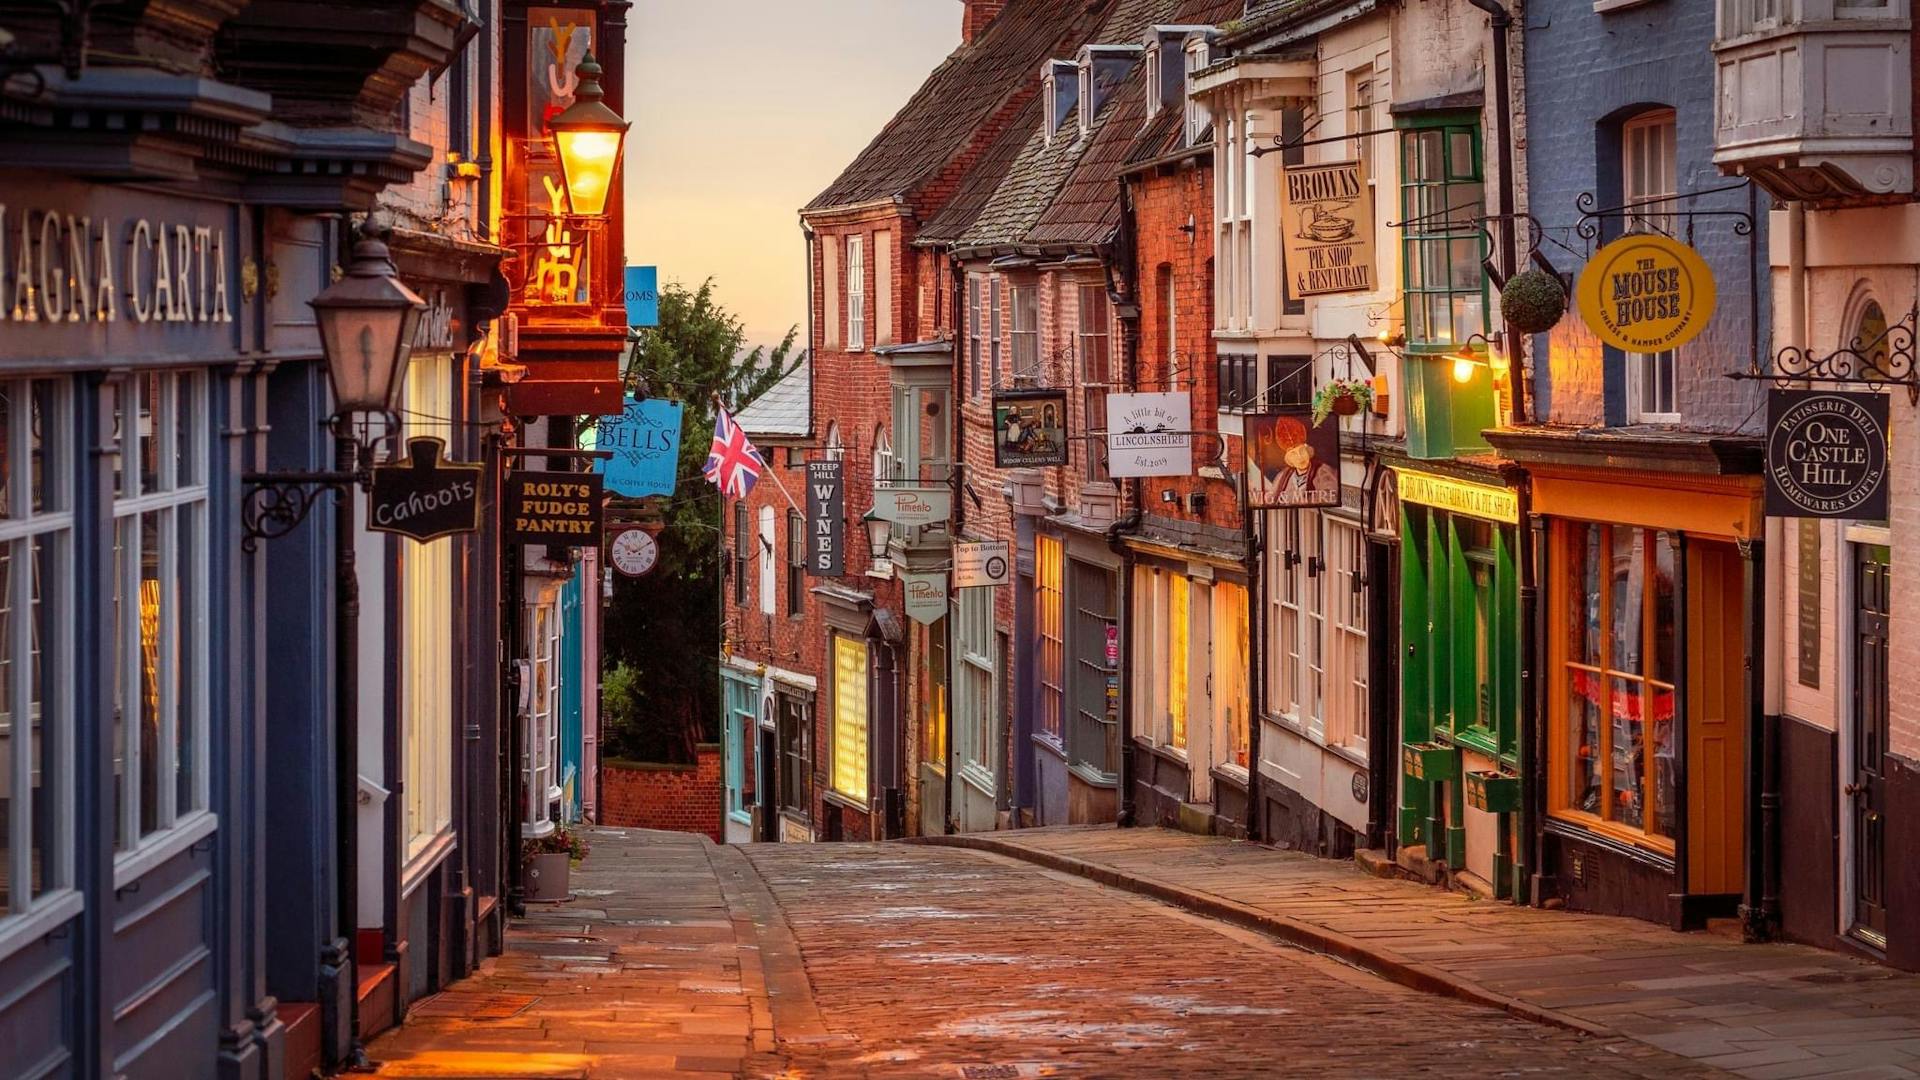 <p>Steep Hill is a famous street in the historic city of Lincoln, England. It connects the lower part of the city with the Cathedral Quarter, where Lincoln Cathedral and Lincoln Castle are located. </p><p><br></p><p>The street is very steep, with a gradient of 16.12 degrees, and is lined with independent shops, tea rooms and restaurants. It also has some Norman houses and Roman remains. </p><p><br></p><p>Steep Hill was voted Britain’s Great Street in 2012 by the Academy of Urbanism. </p>